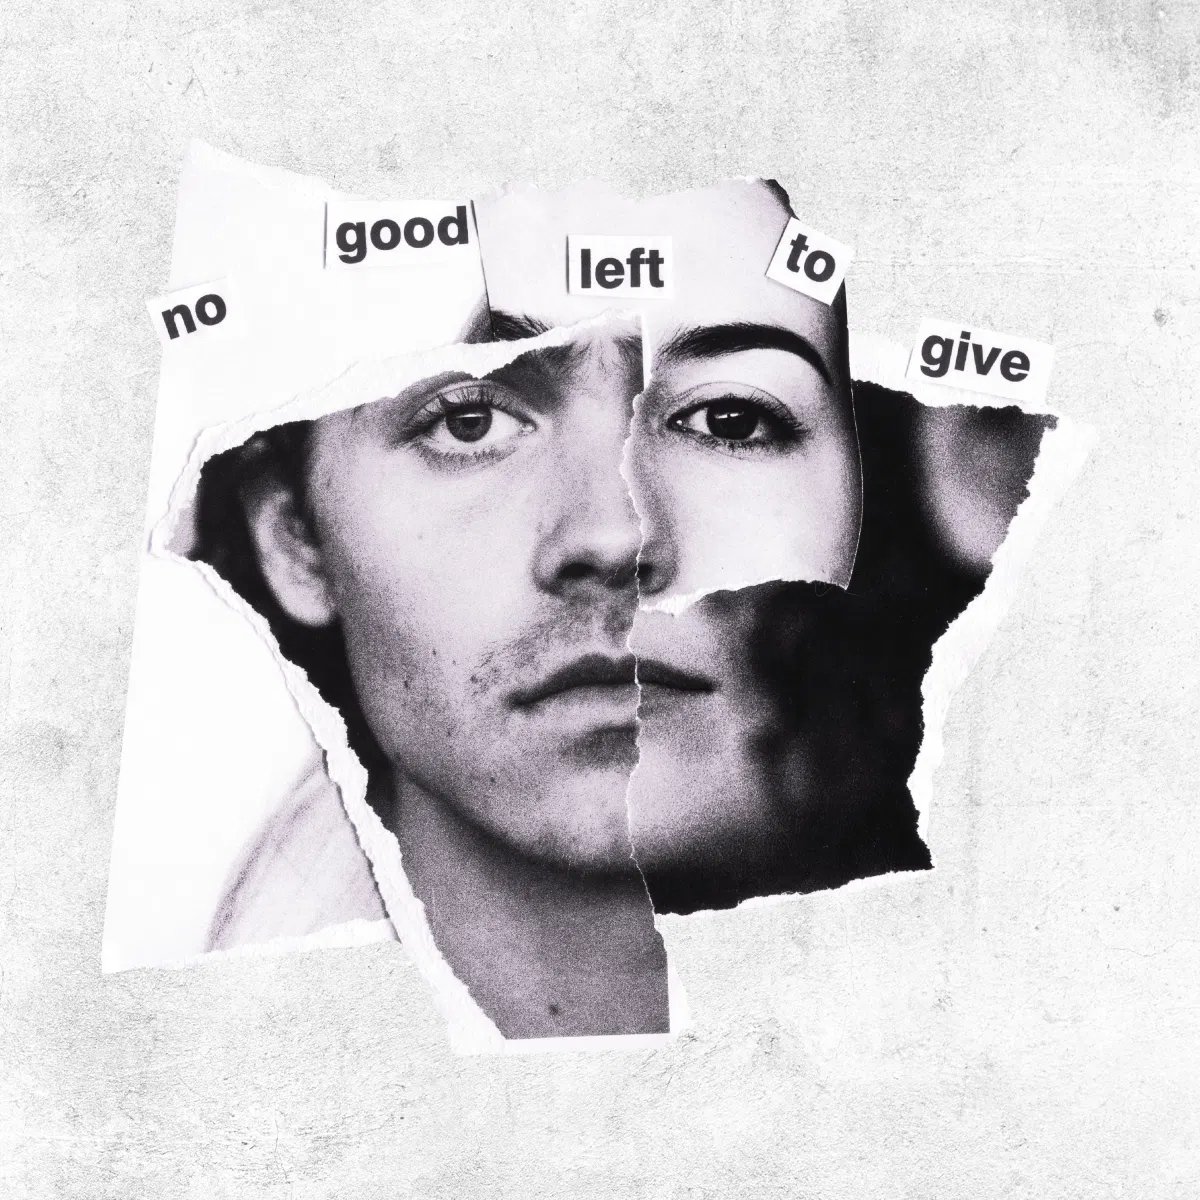 #14 Movements - No Good Left To GiveGenre: Alternative Rock, Midwest EmoTop Tracks: Don't Give Up Your Ghost Moonlight Line Skin To Skin